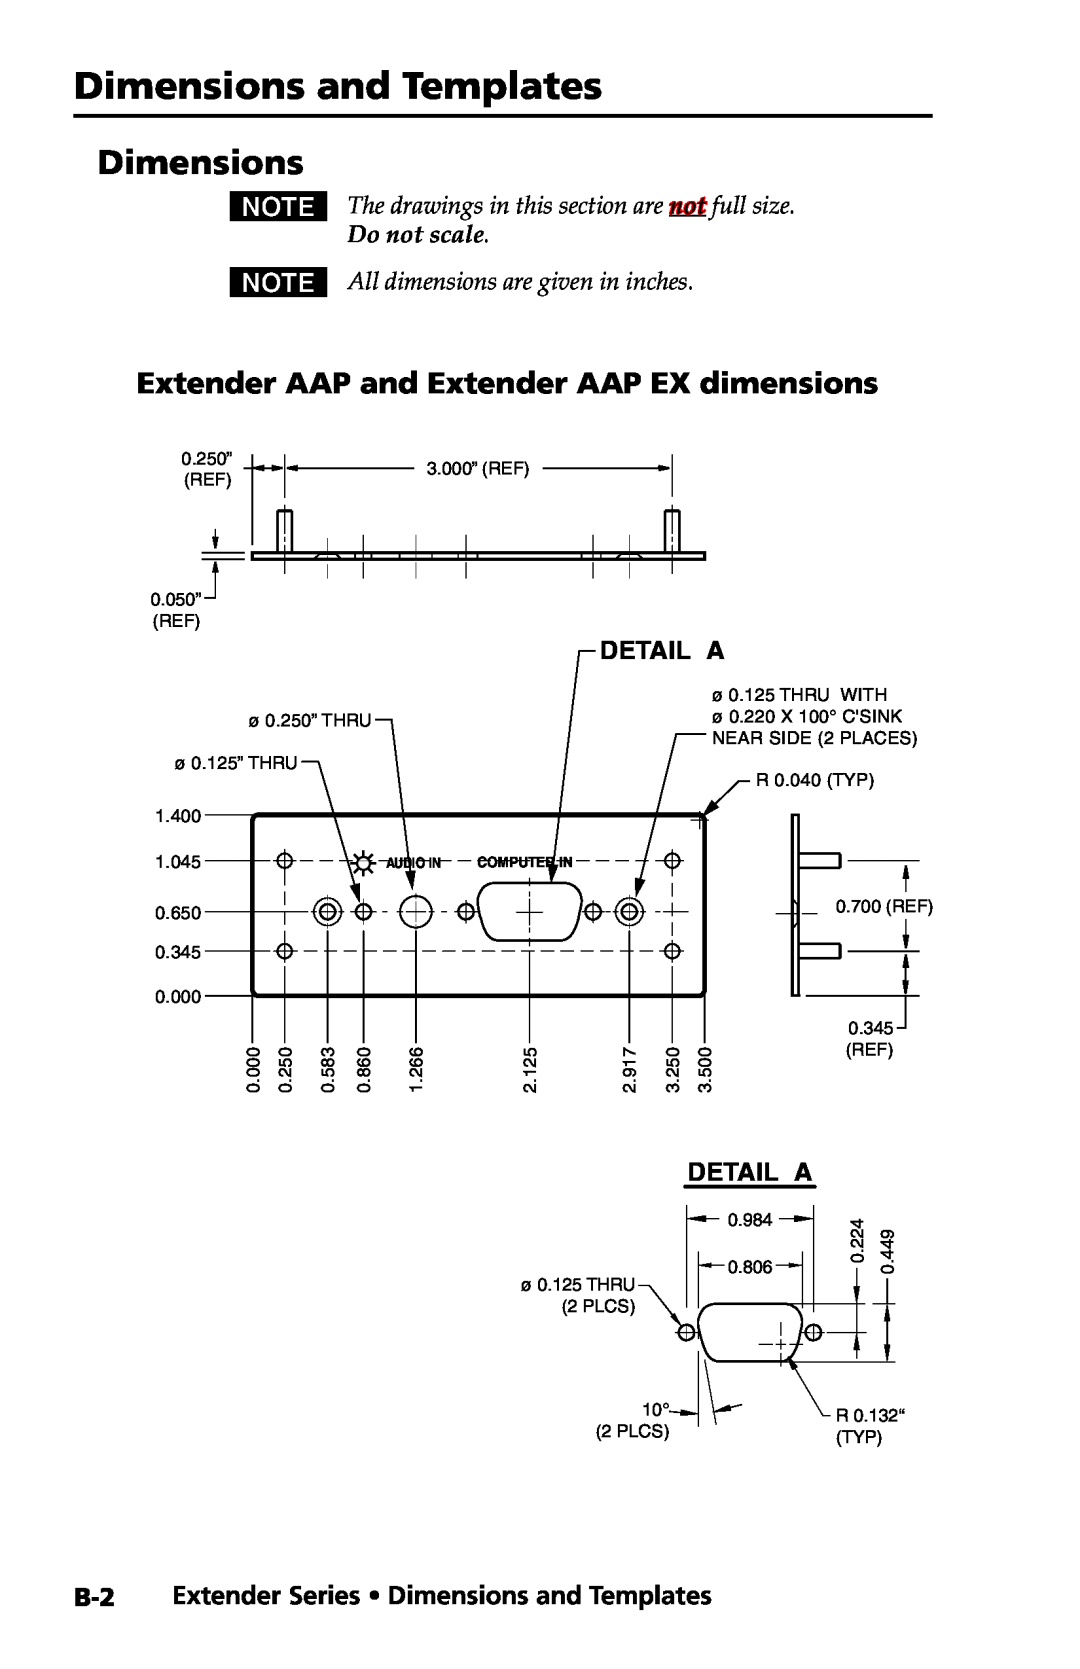 Extron electronic Extender Series manual Dimensions and Templates, Extender AAP and Extender AAP EX dimensions, Detail A 